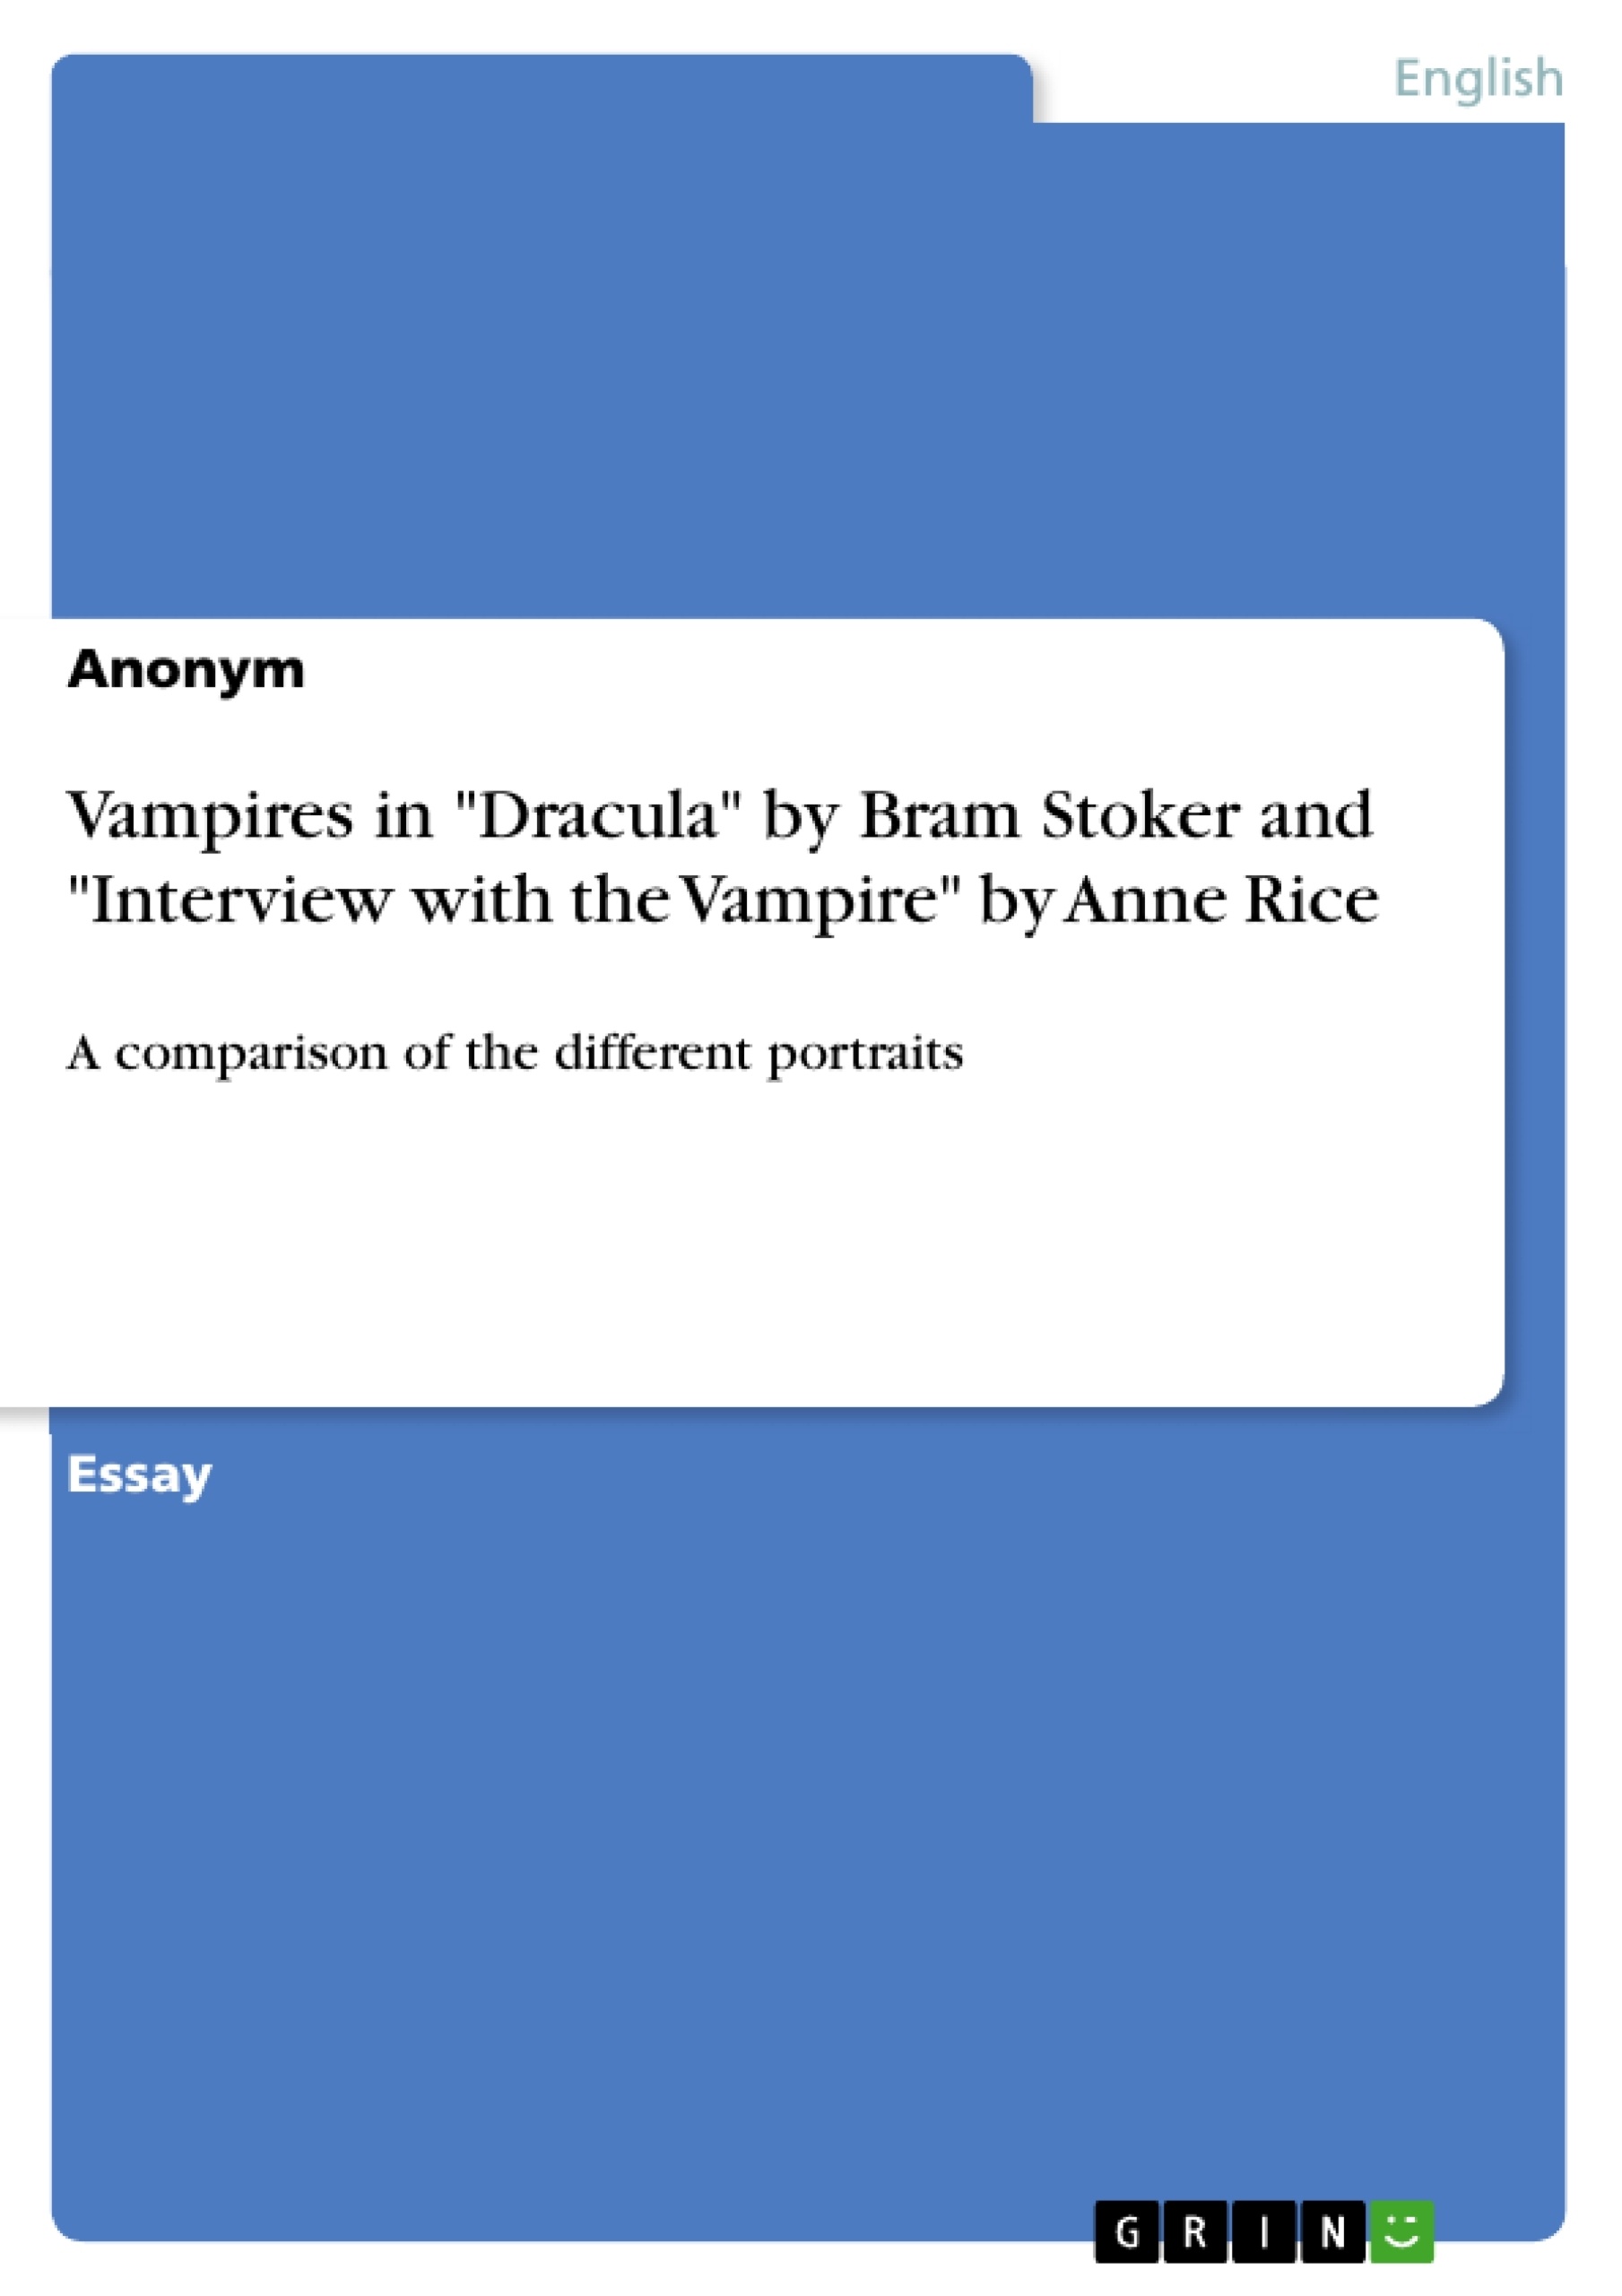 Title: Vampires in "Dracula" by Bram Stoker and "Interview with the Vampire" by Anne Rice